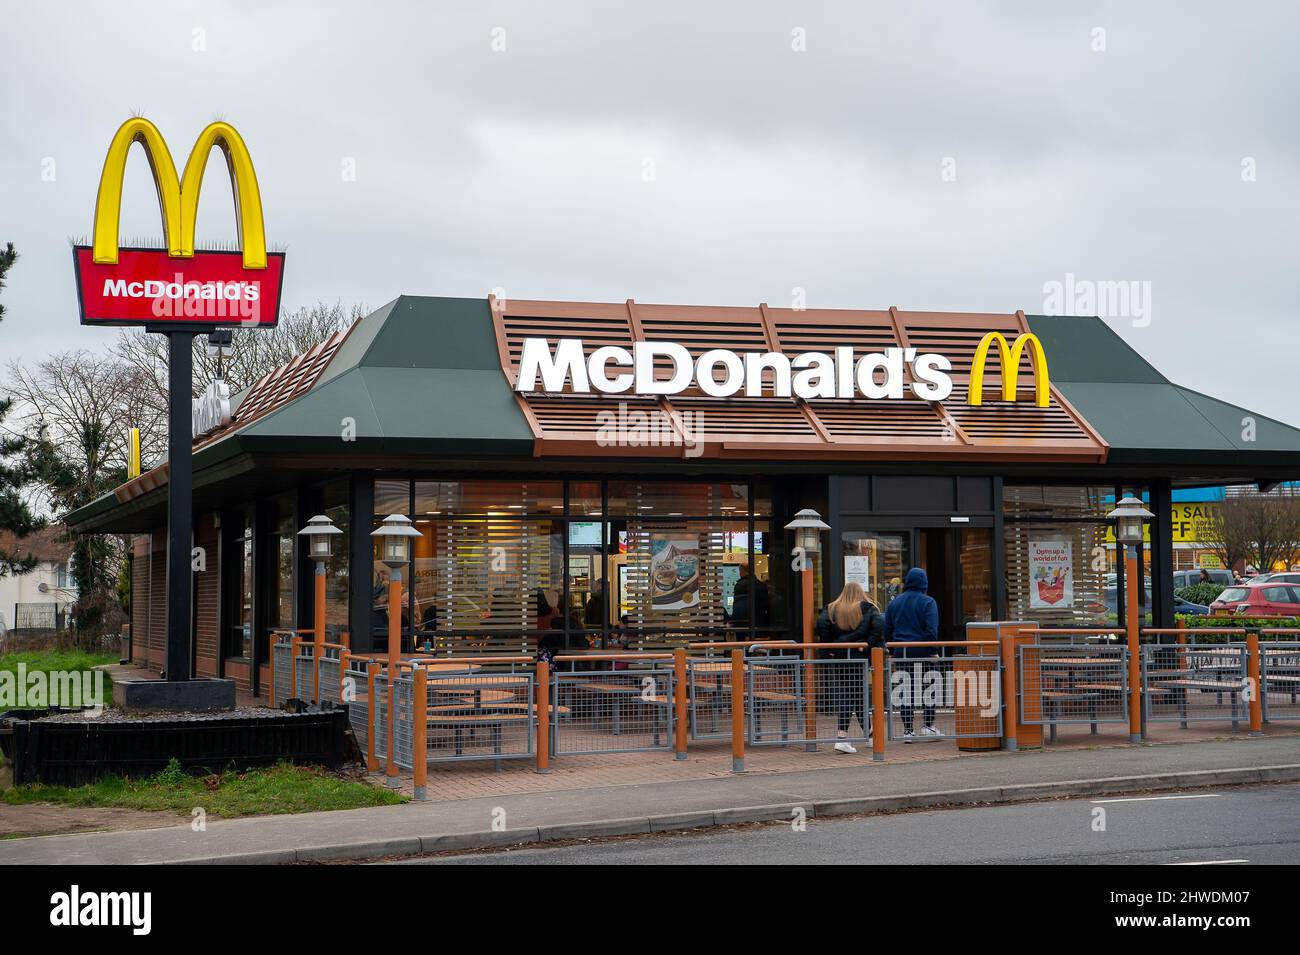 Slough, Berkshire, UK. 5th March, 2022. Following the Russian invasion of Ukraine, there calls for McDonald's to pause their operations in Russia. Boycott McDonald's has been trending on social media today. Credit: Maureen McLean/Alamy Live News Stock Photo